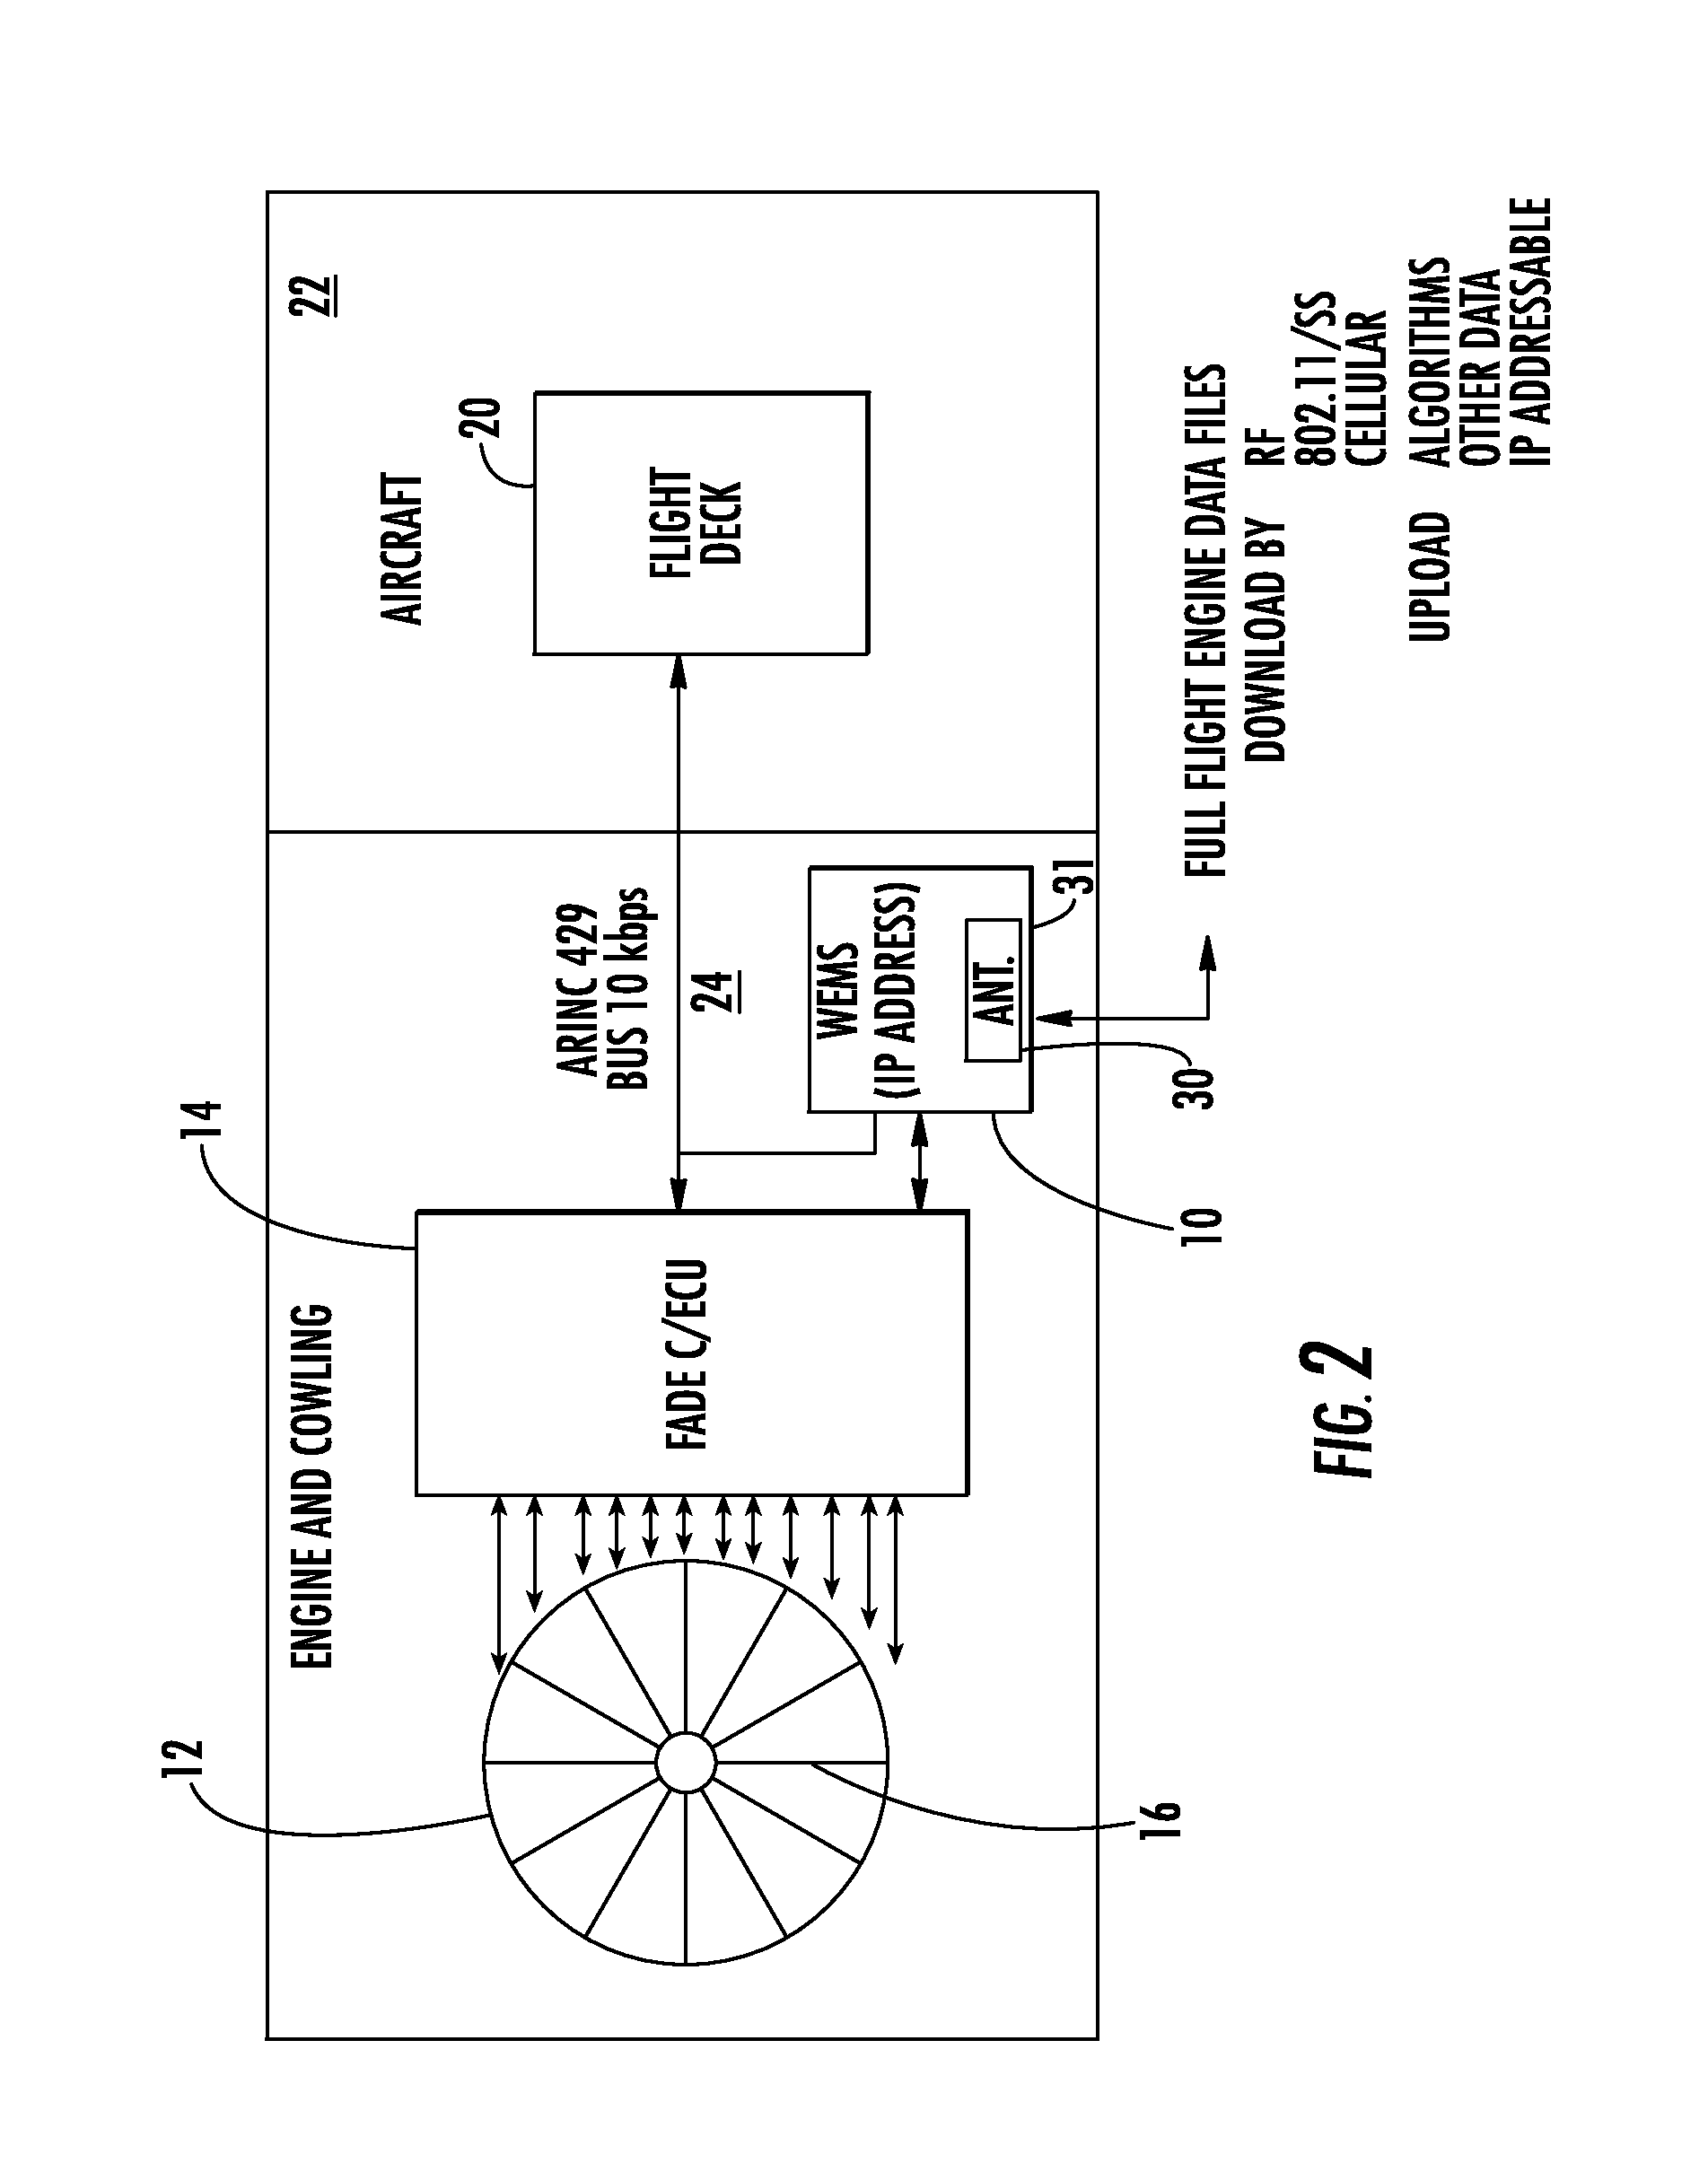 Wireless engine monitoring system and associated engine wireless sensor network